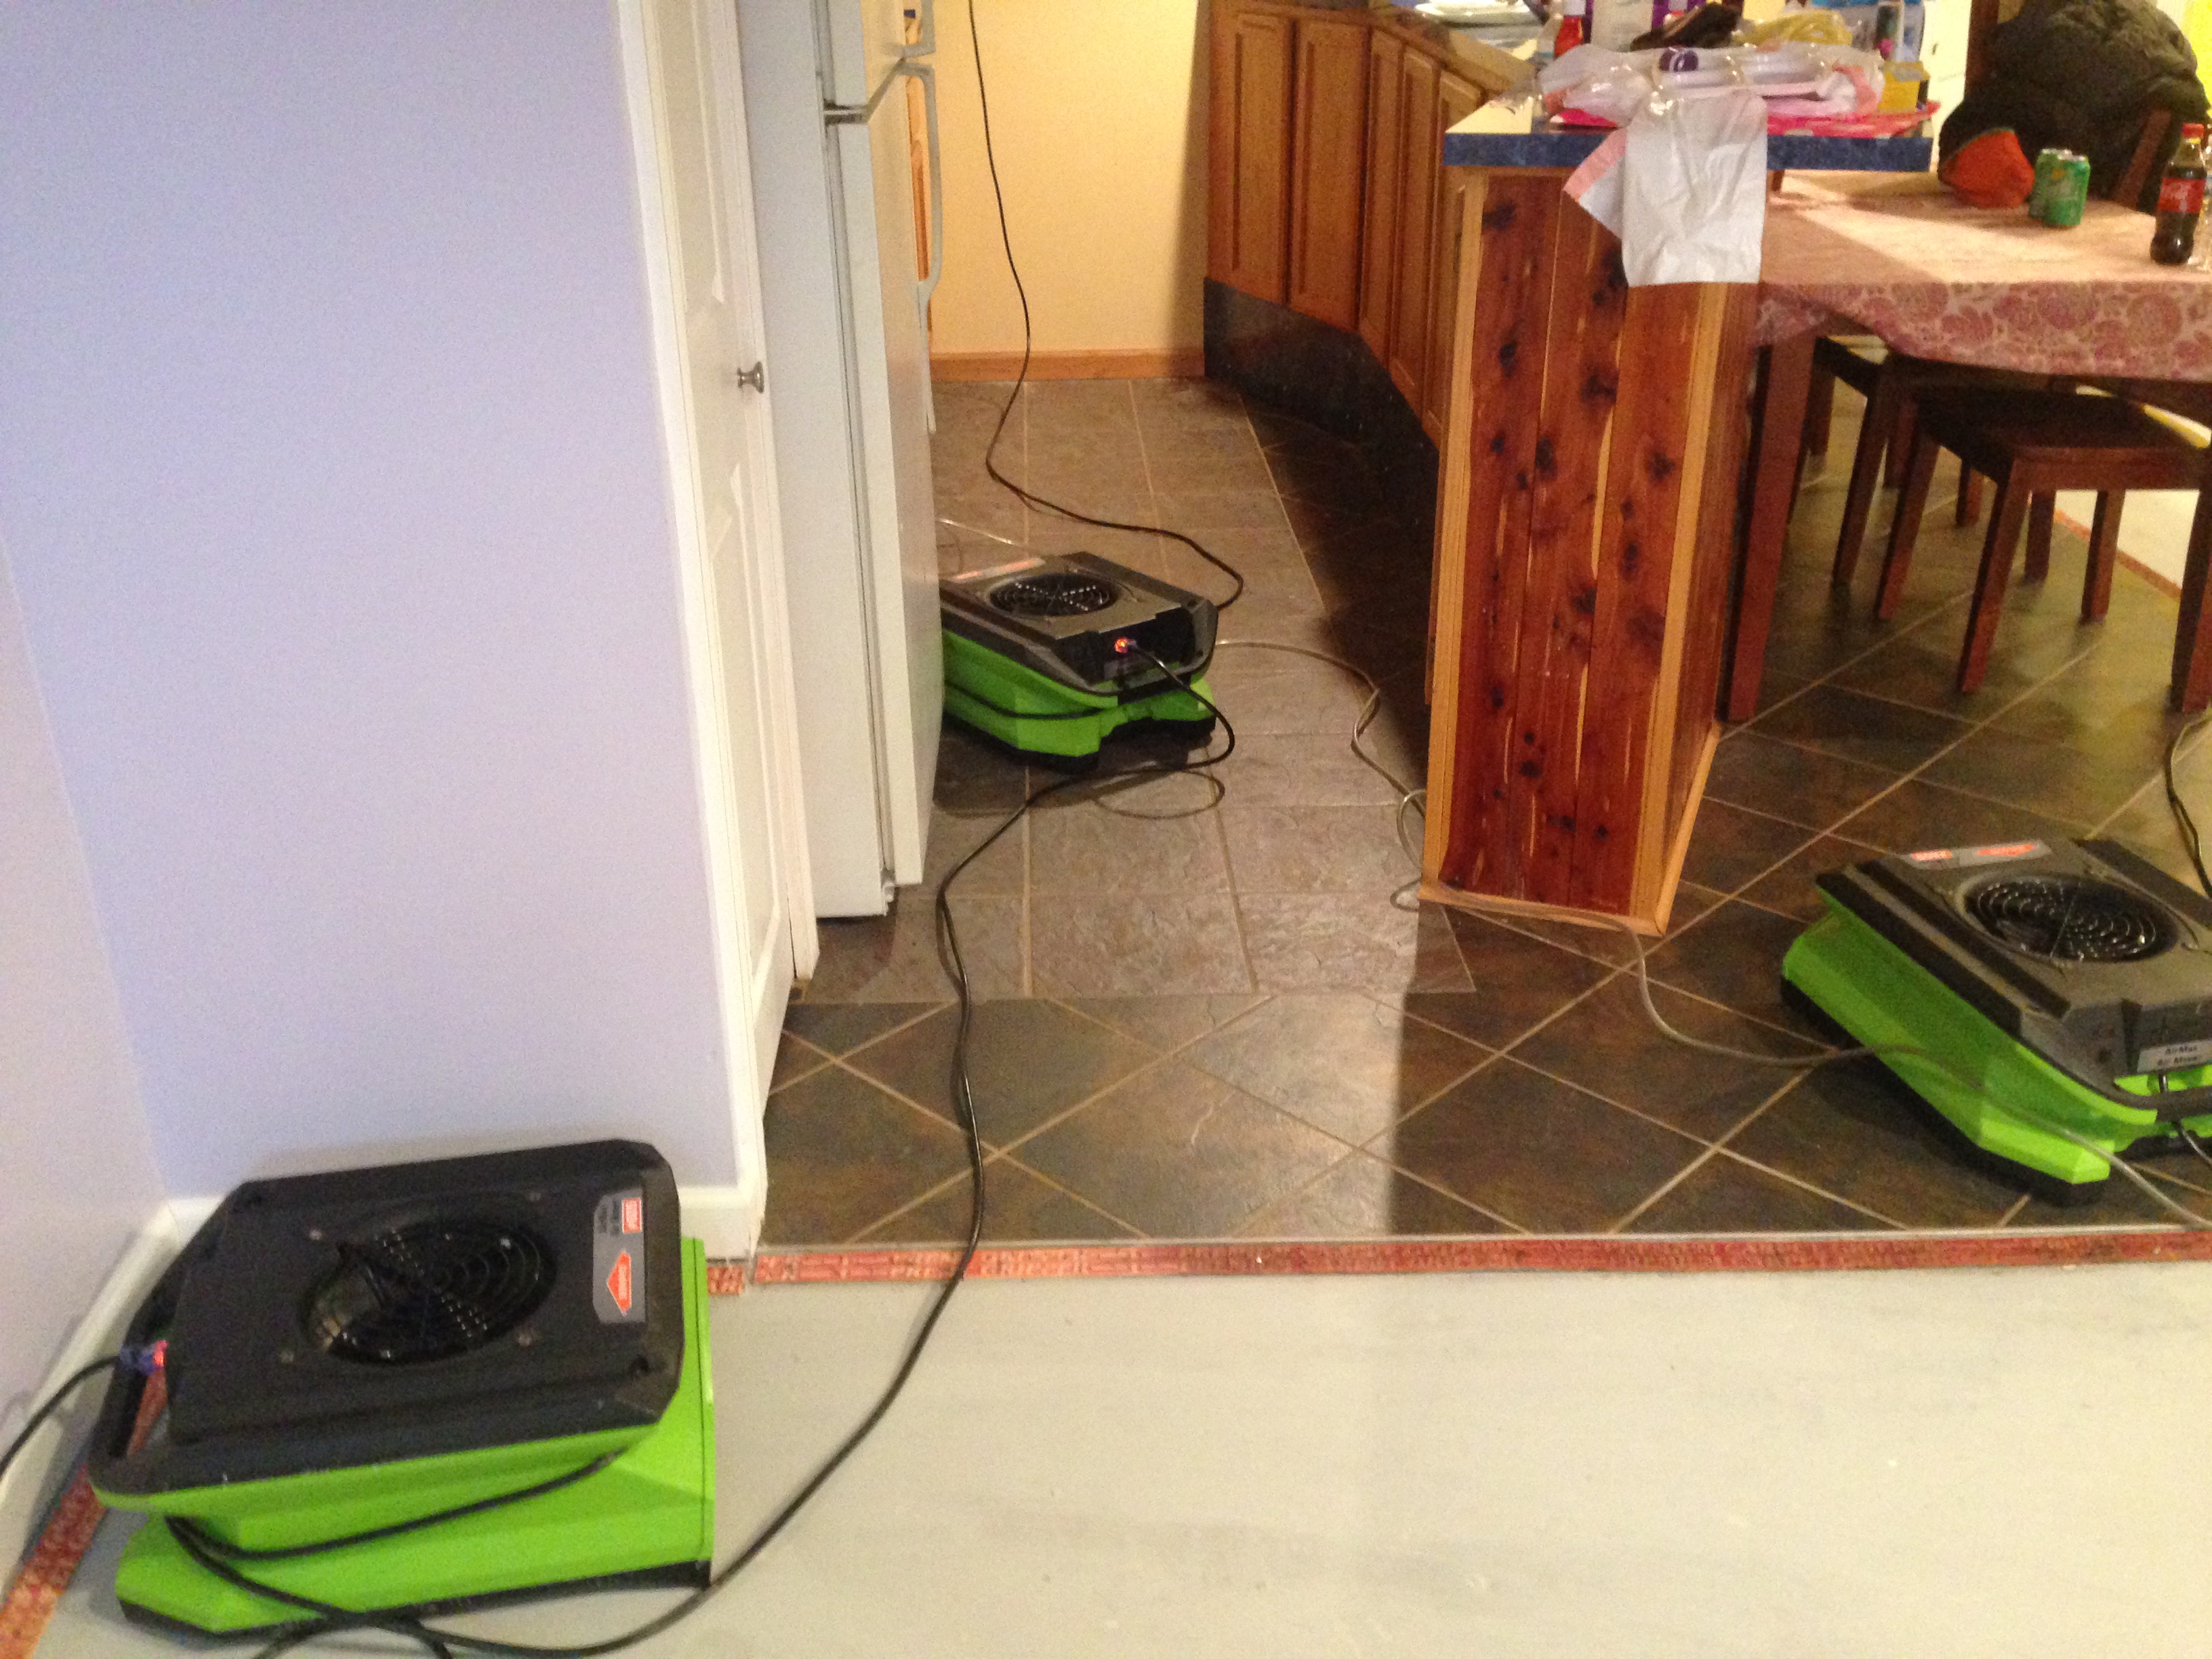 The SERVPRO equipment is up and running during a residential restoration!